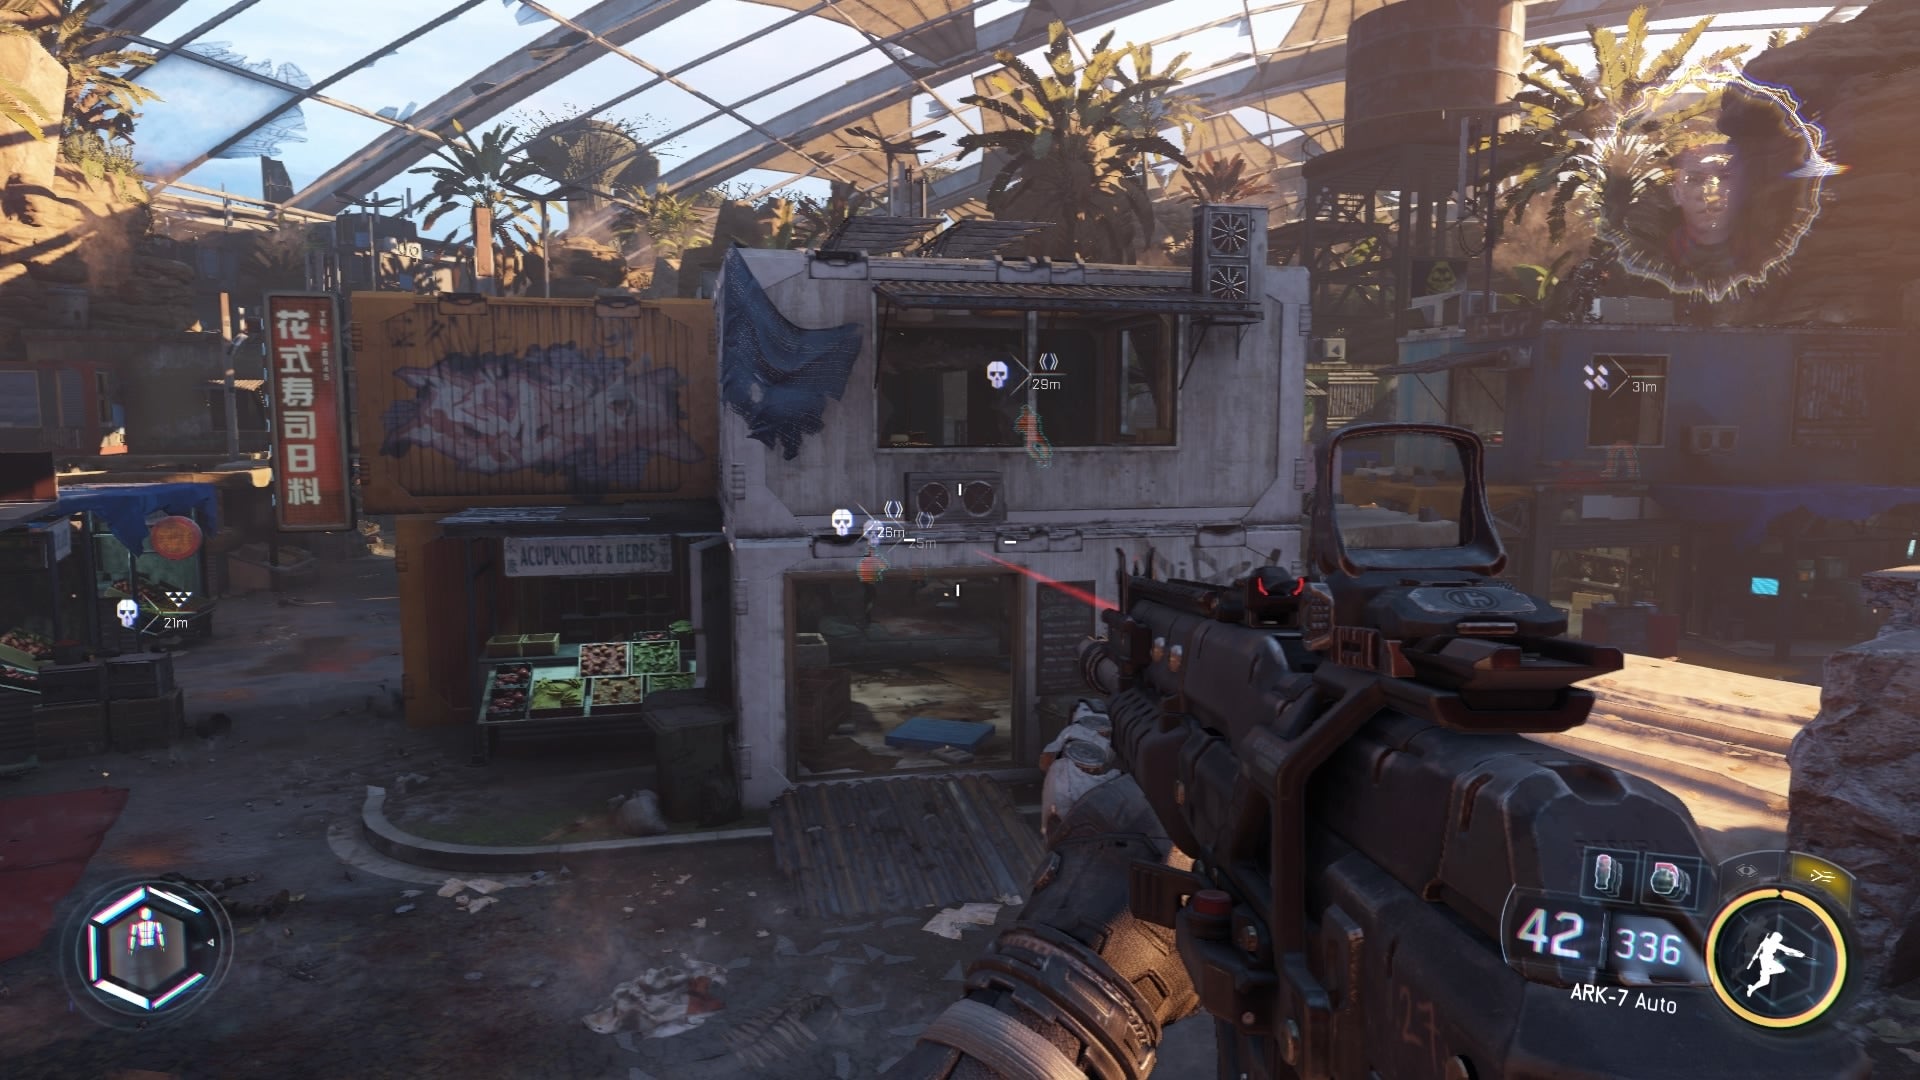 How To Use Active Camo In Black Ops 3 Campaign - Truths